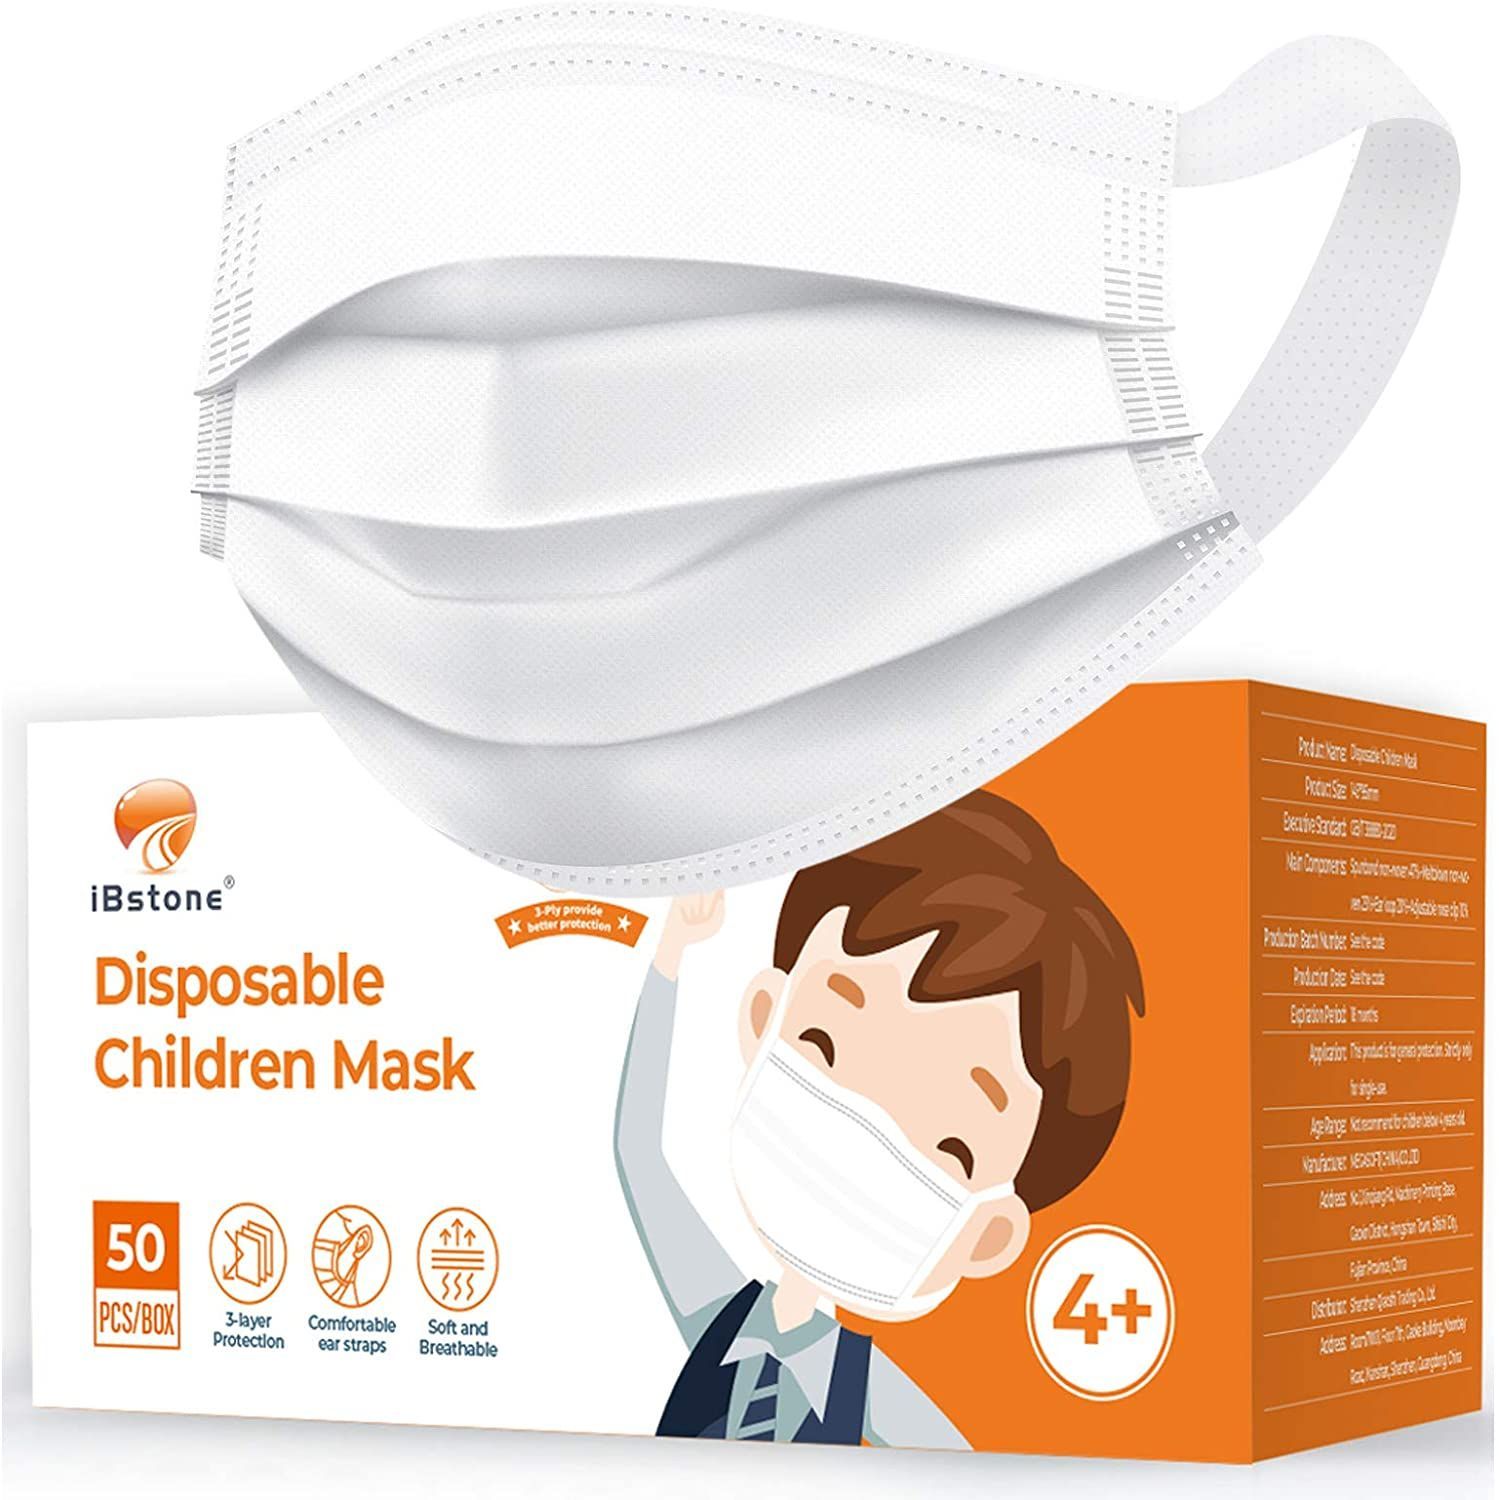 50 Pcs Childrens Oral Protective Sleeve Disposable Cover for Kids,3-ply Filter A 50pcs 